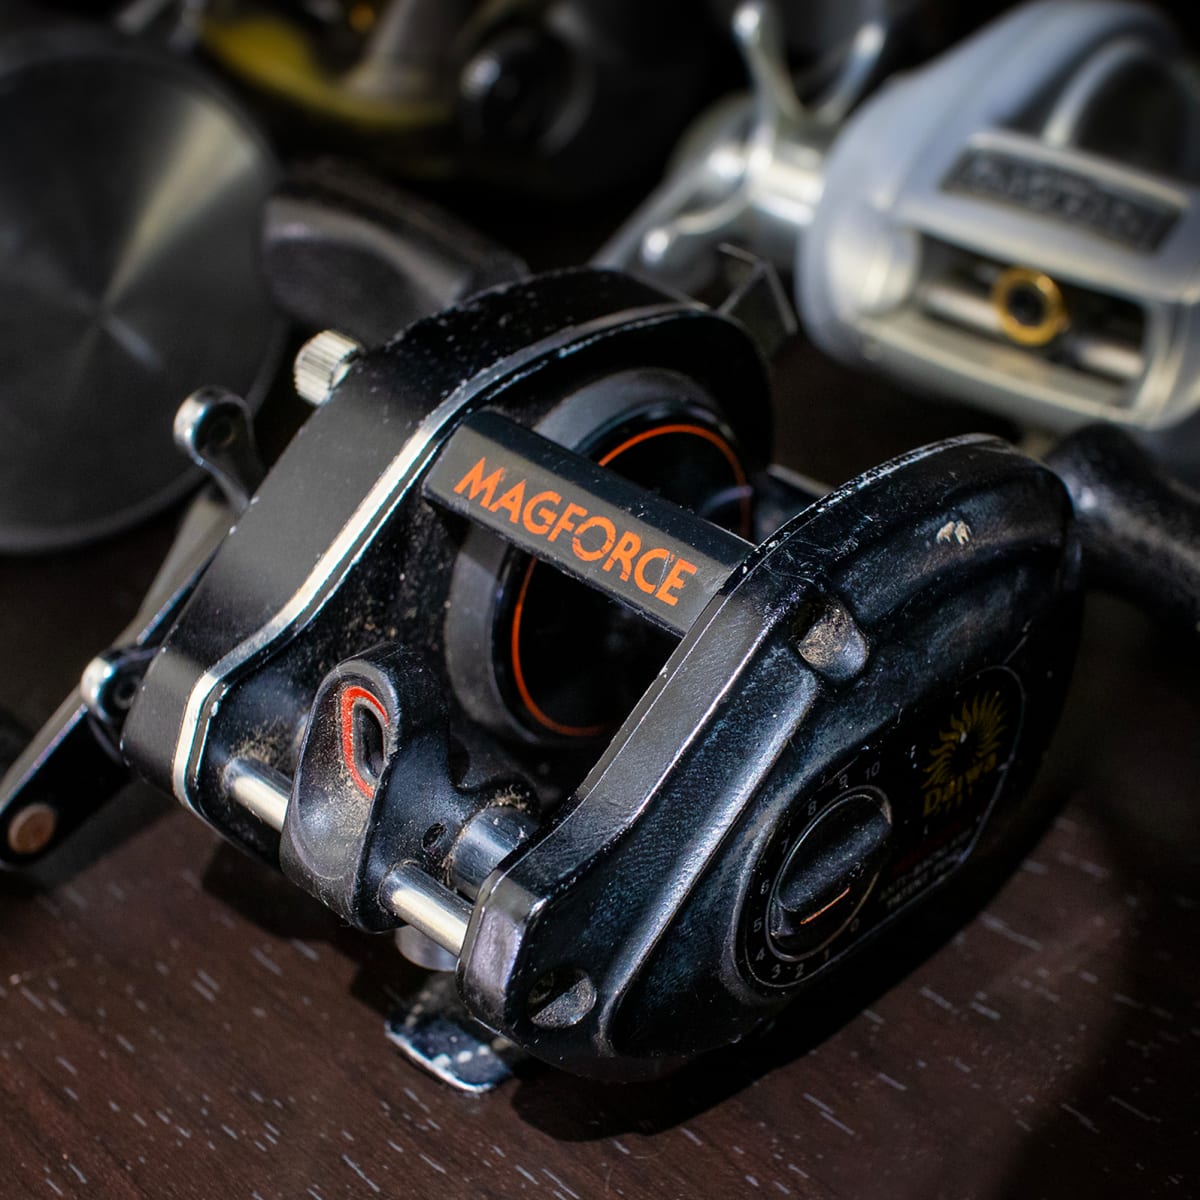 Is This 1981 Daiwa Reel Better Than Today's New Reels? - Men's